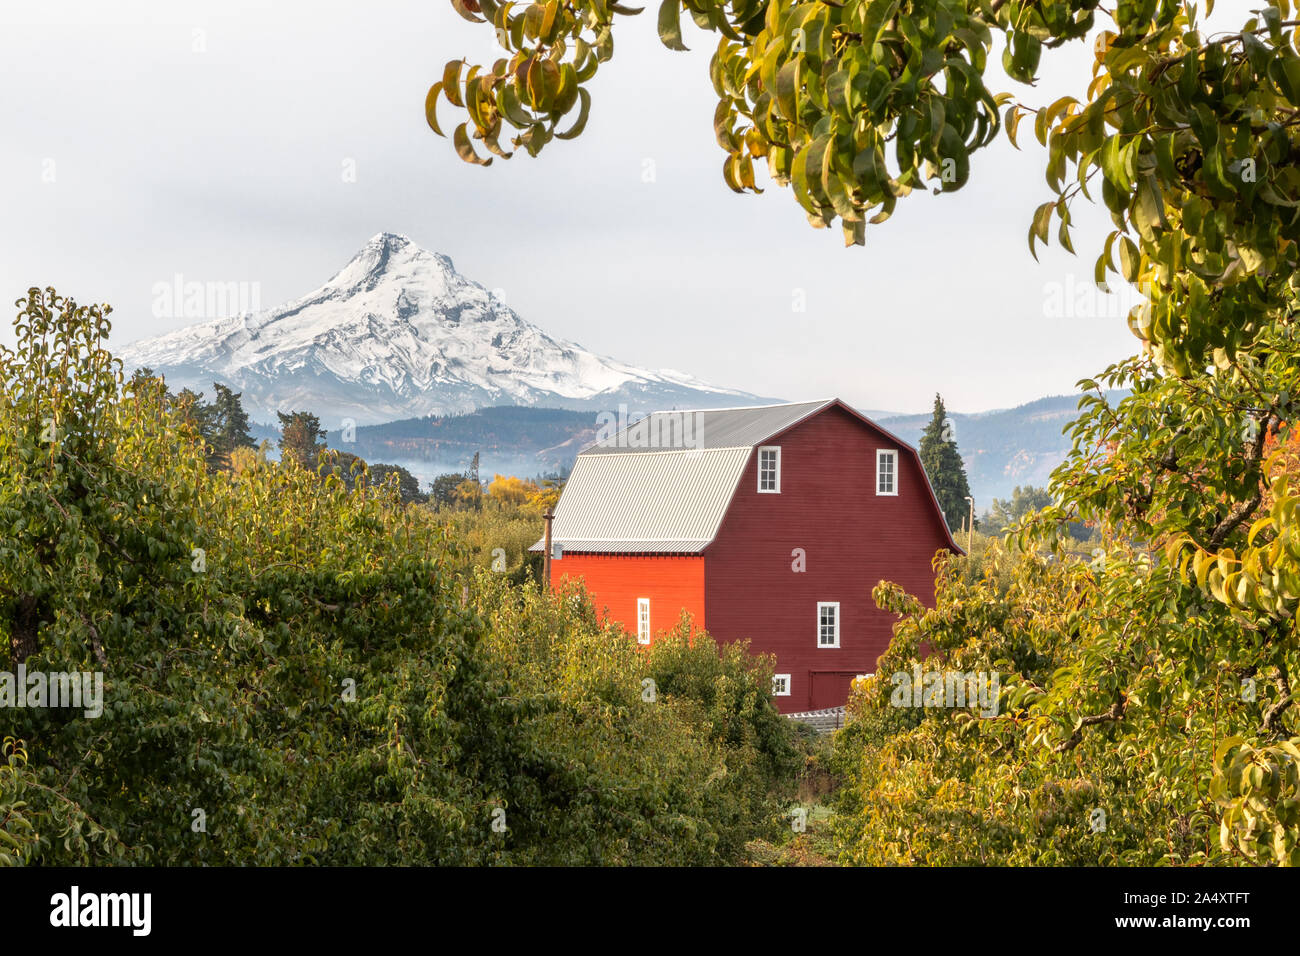 View of a red barn and orchard with Mt Hood in the background in Hood River, Oregon, USA Stock Photo